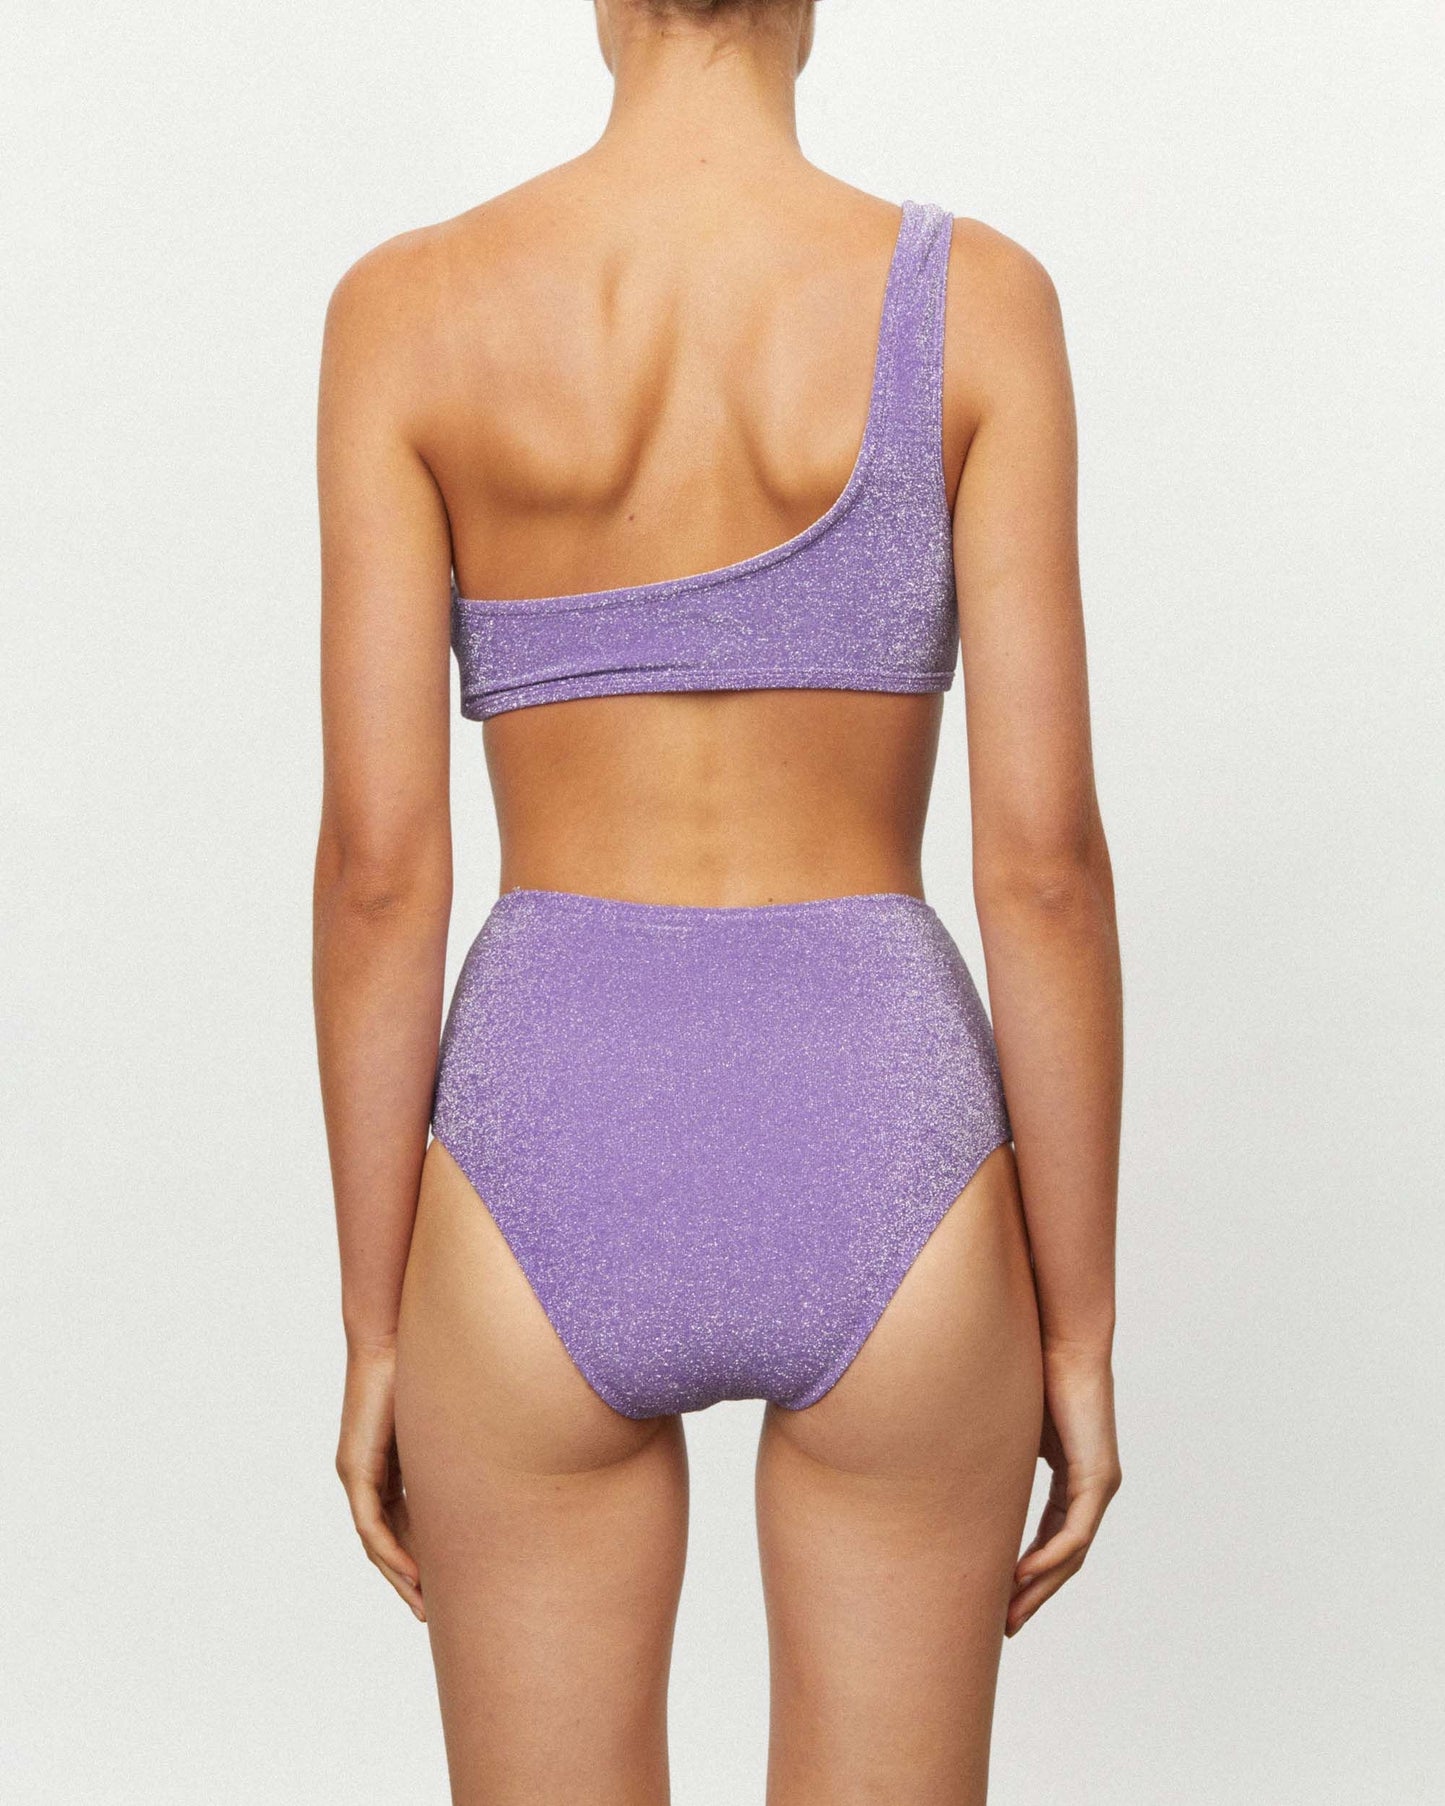 On body back of THE ASYMMETRIC TOP - VIOLET LUREX